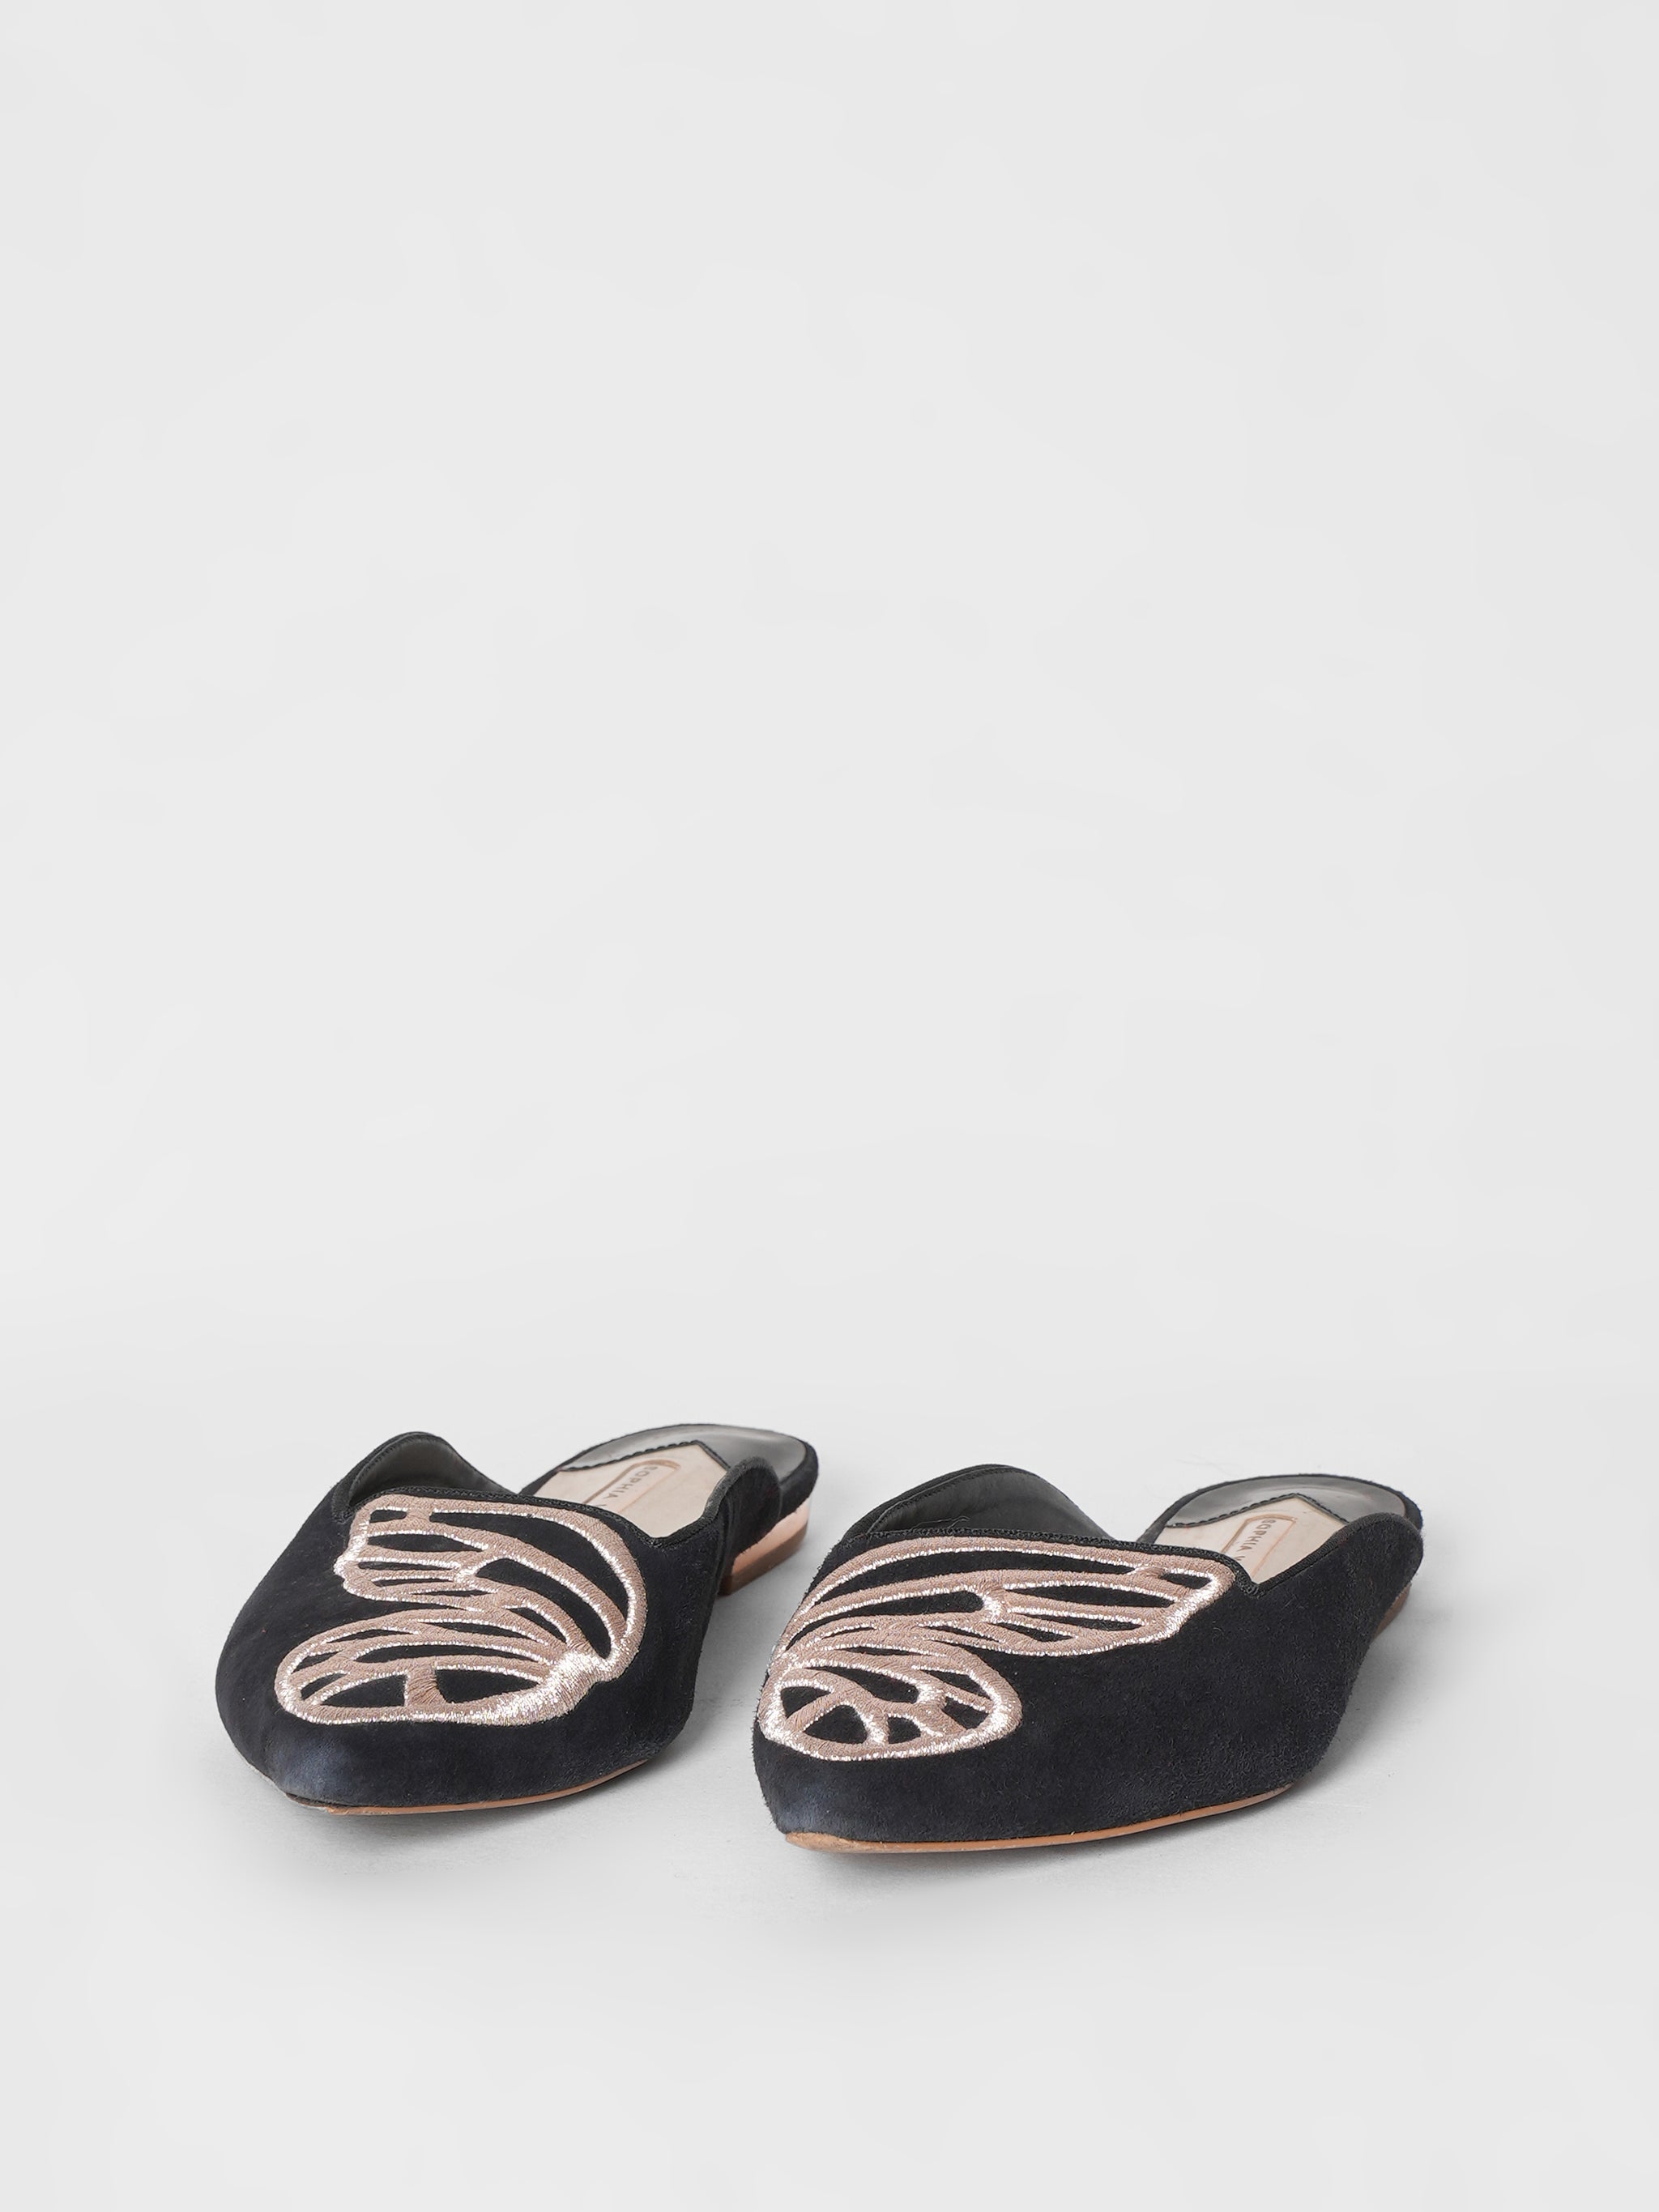 Sophia Webster Butterfly Embroidery Black Shoes